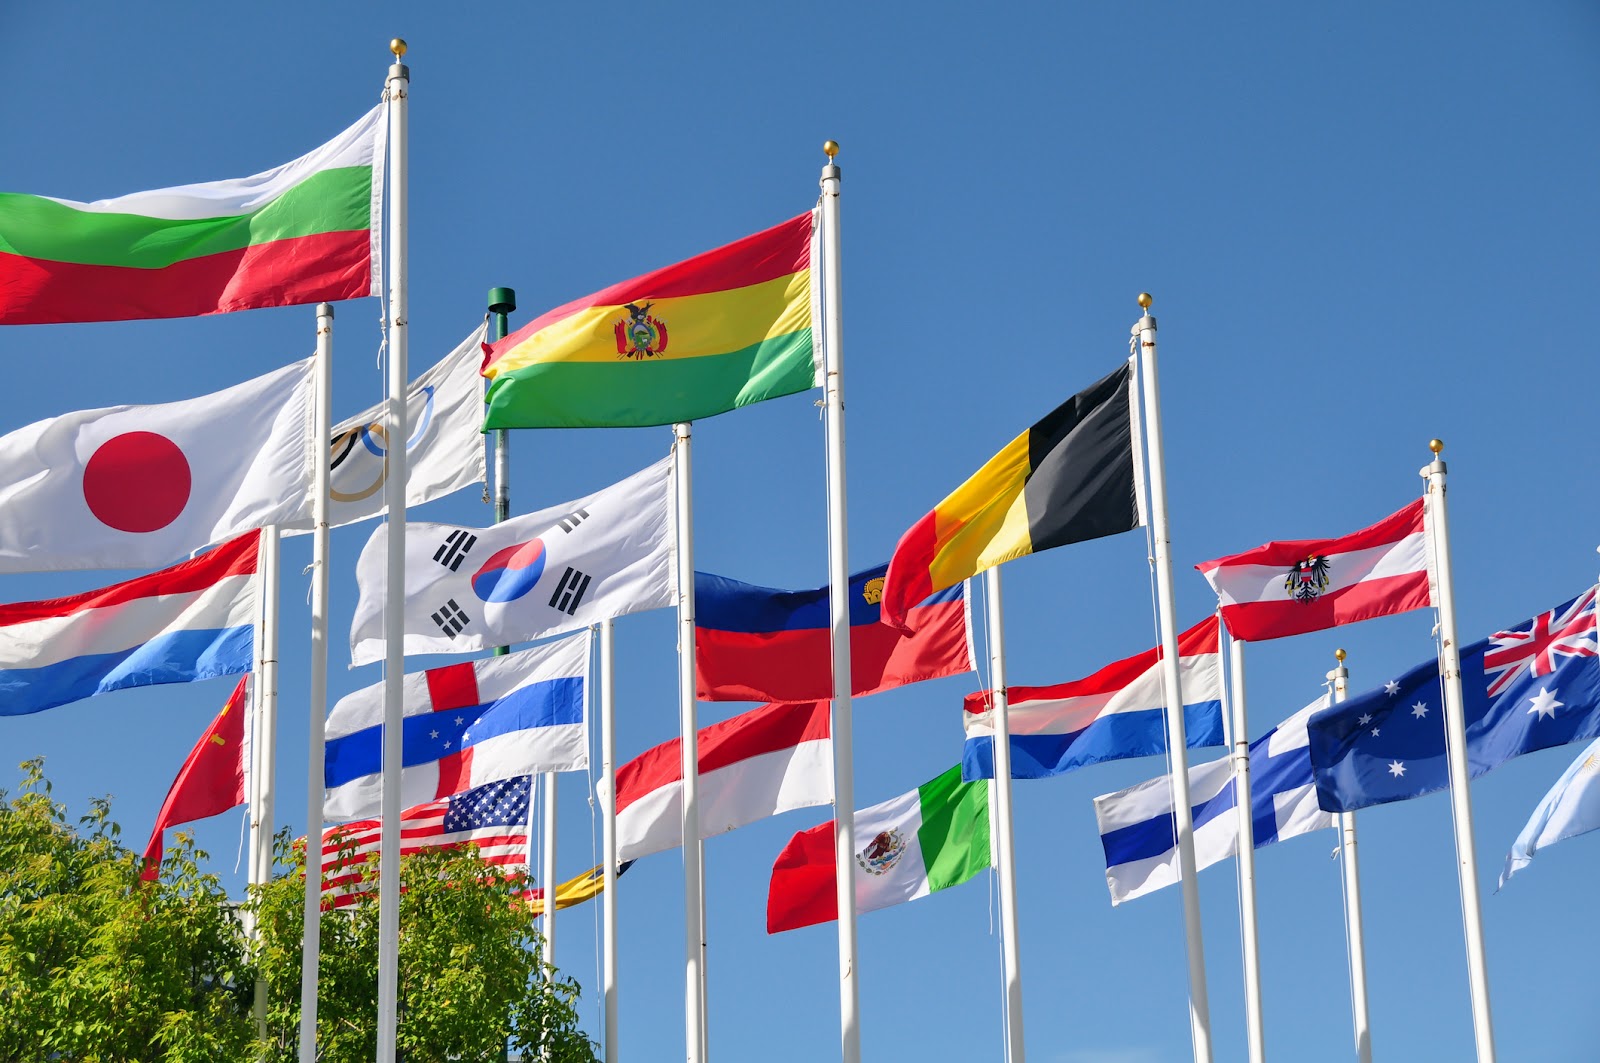 various flags of the world blowing in the breeze against a blue sky.